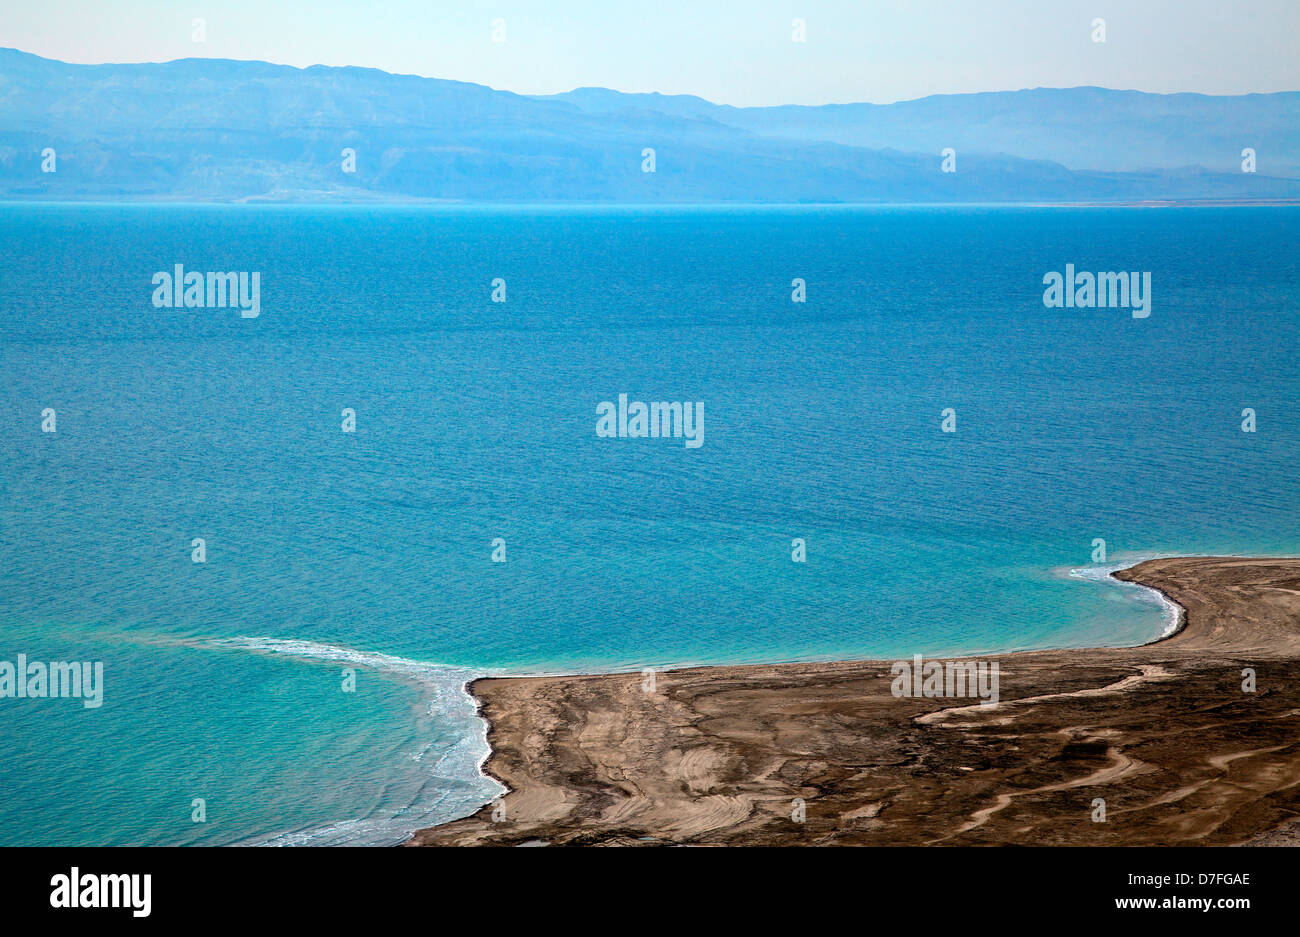 A view at southern part Dead Sea from mountains to its east at morning time. Edom mountains in Jordan can be seen in distance. Stock Photo